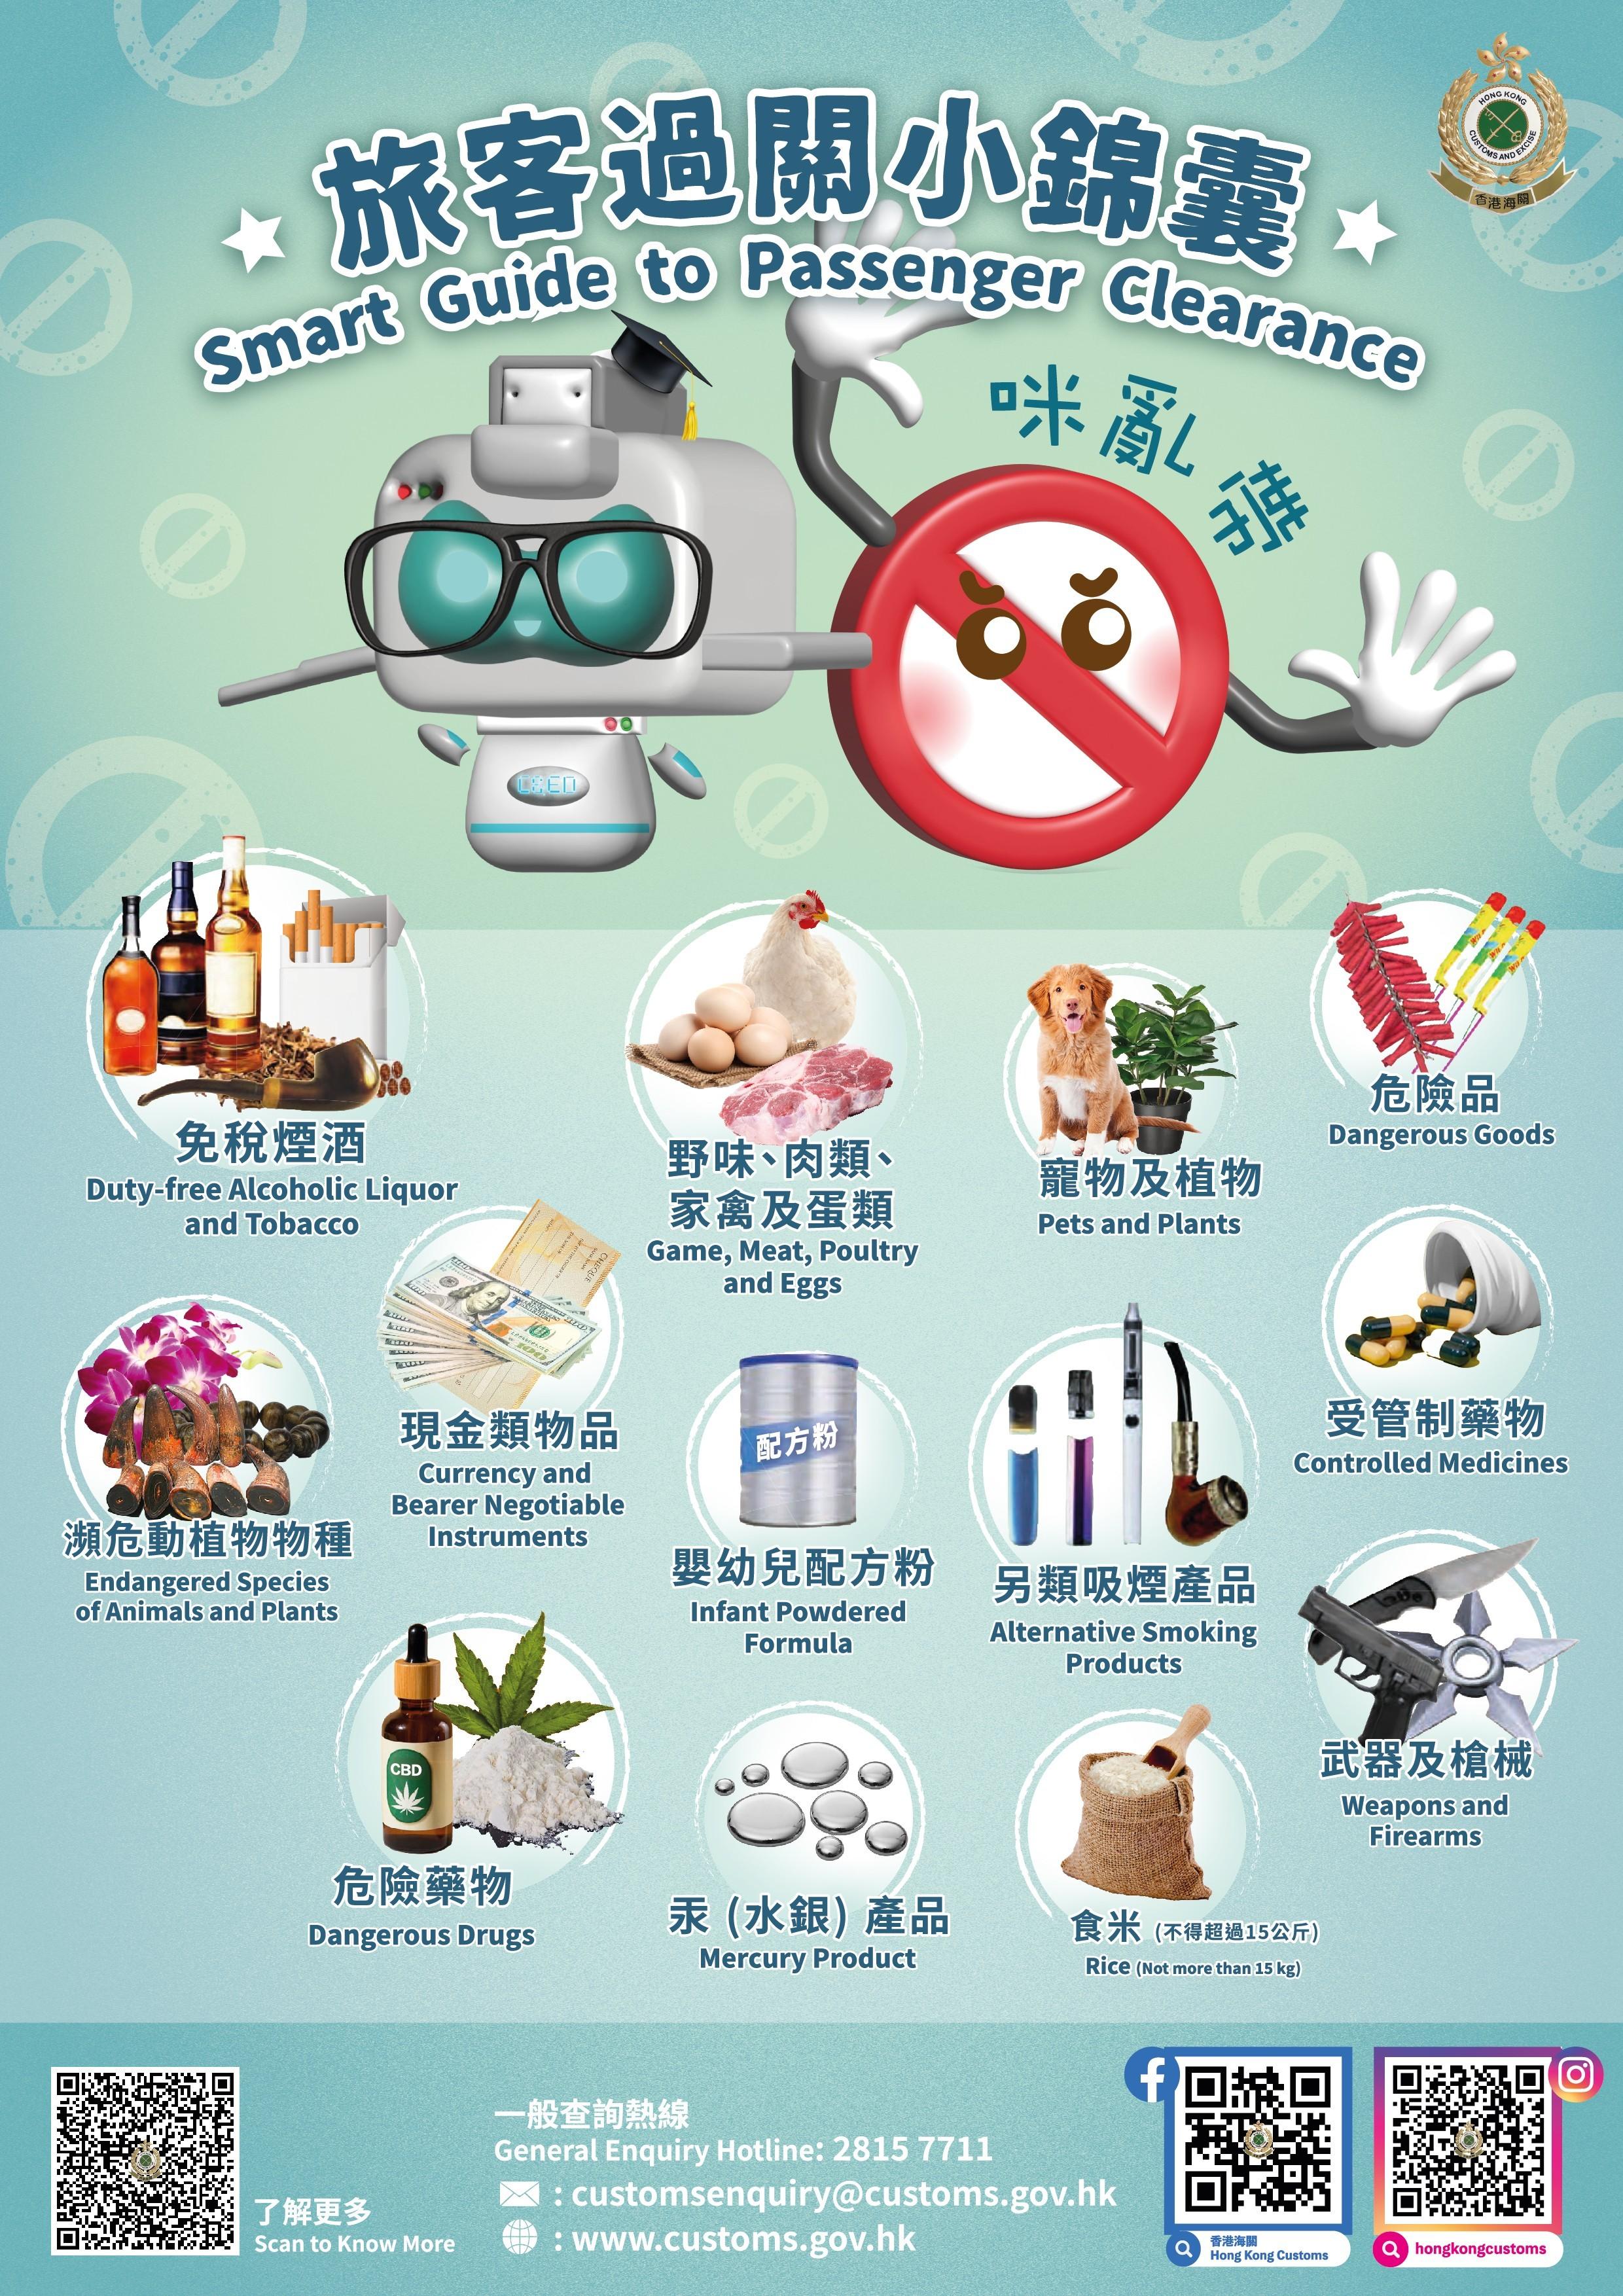 The Customs and Excise Department disseminates the Smart Guide to Passenger Clearance via the social media platform pages and WeChat Official Account to remind members of the public and travellers not to bring prohibited and controlled items into and out of Hong Kong.